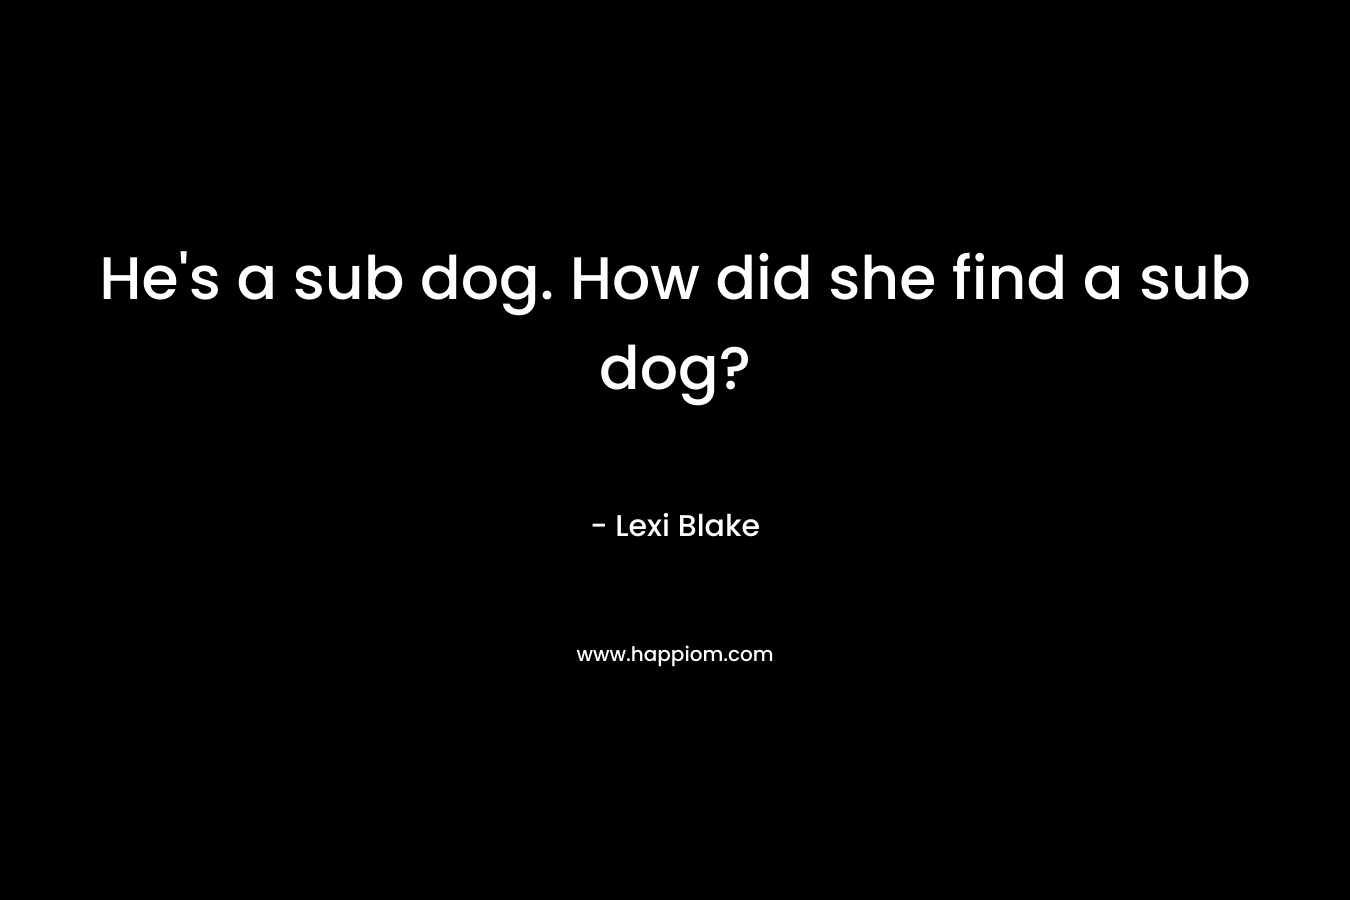 He's a sub dog. How did she find a sub dog?